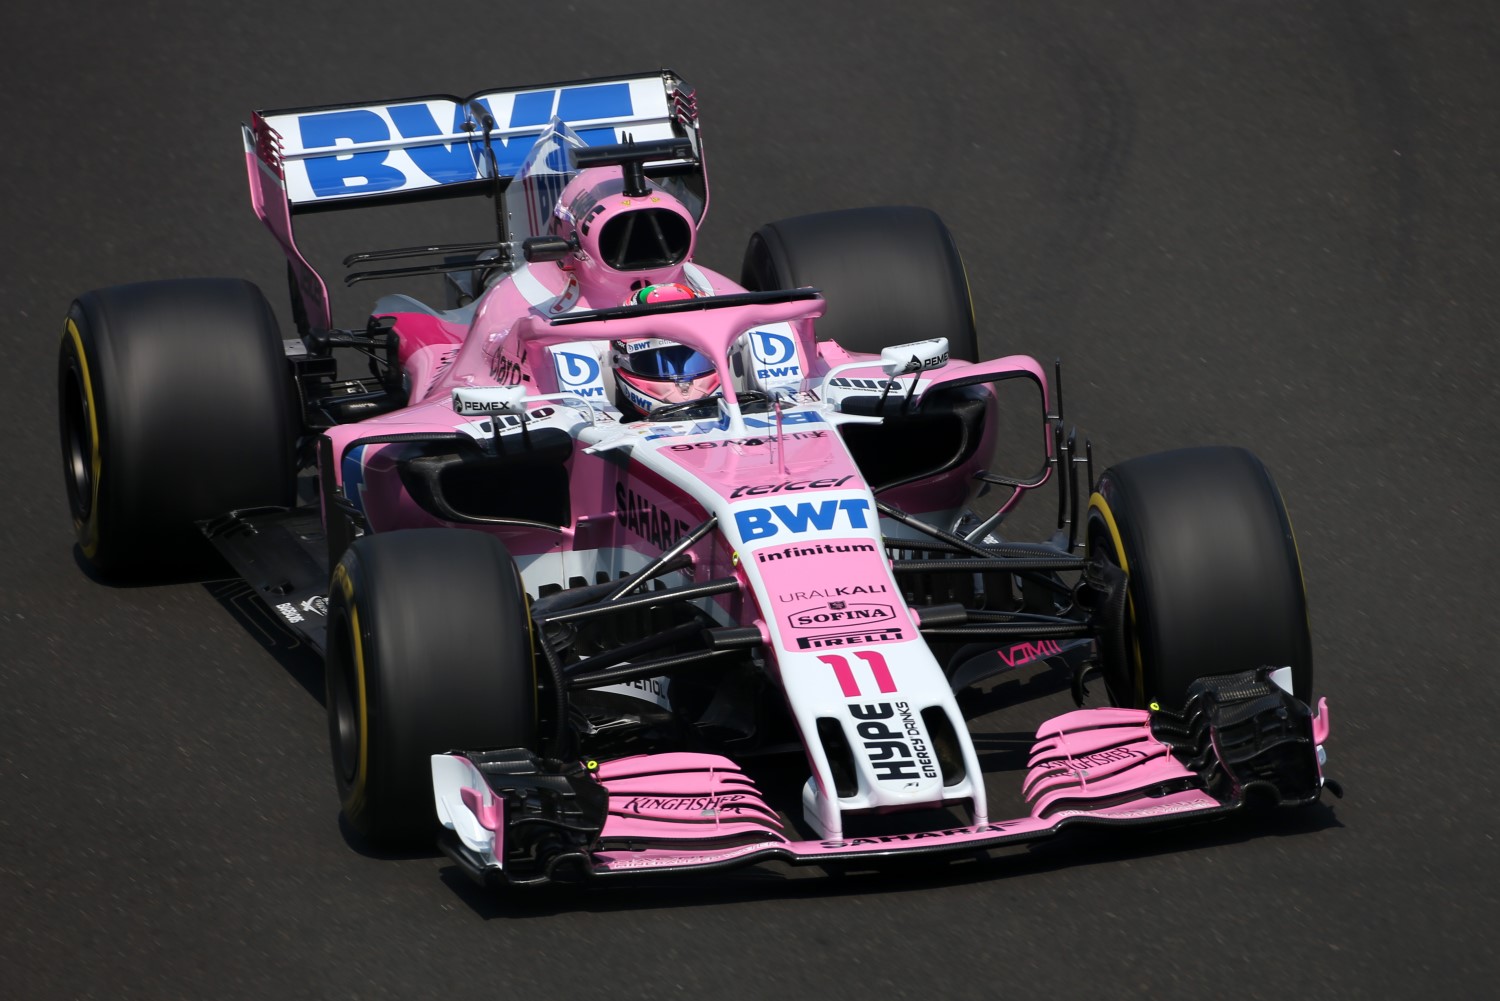 Perez races on in Hungary